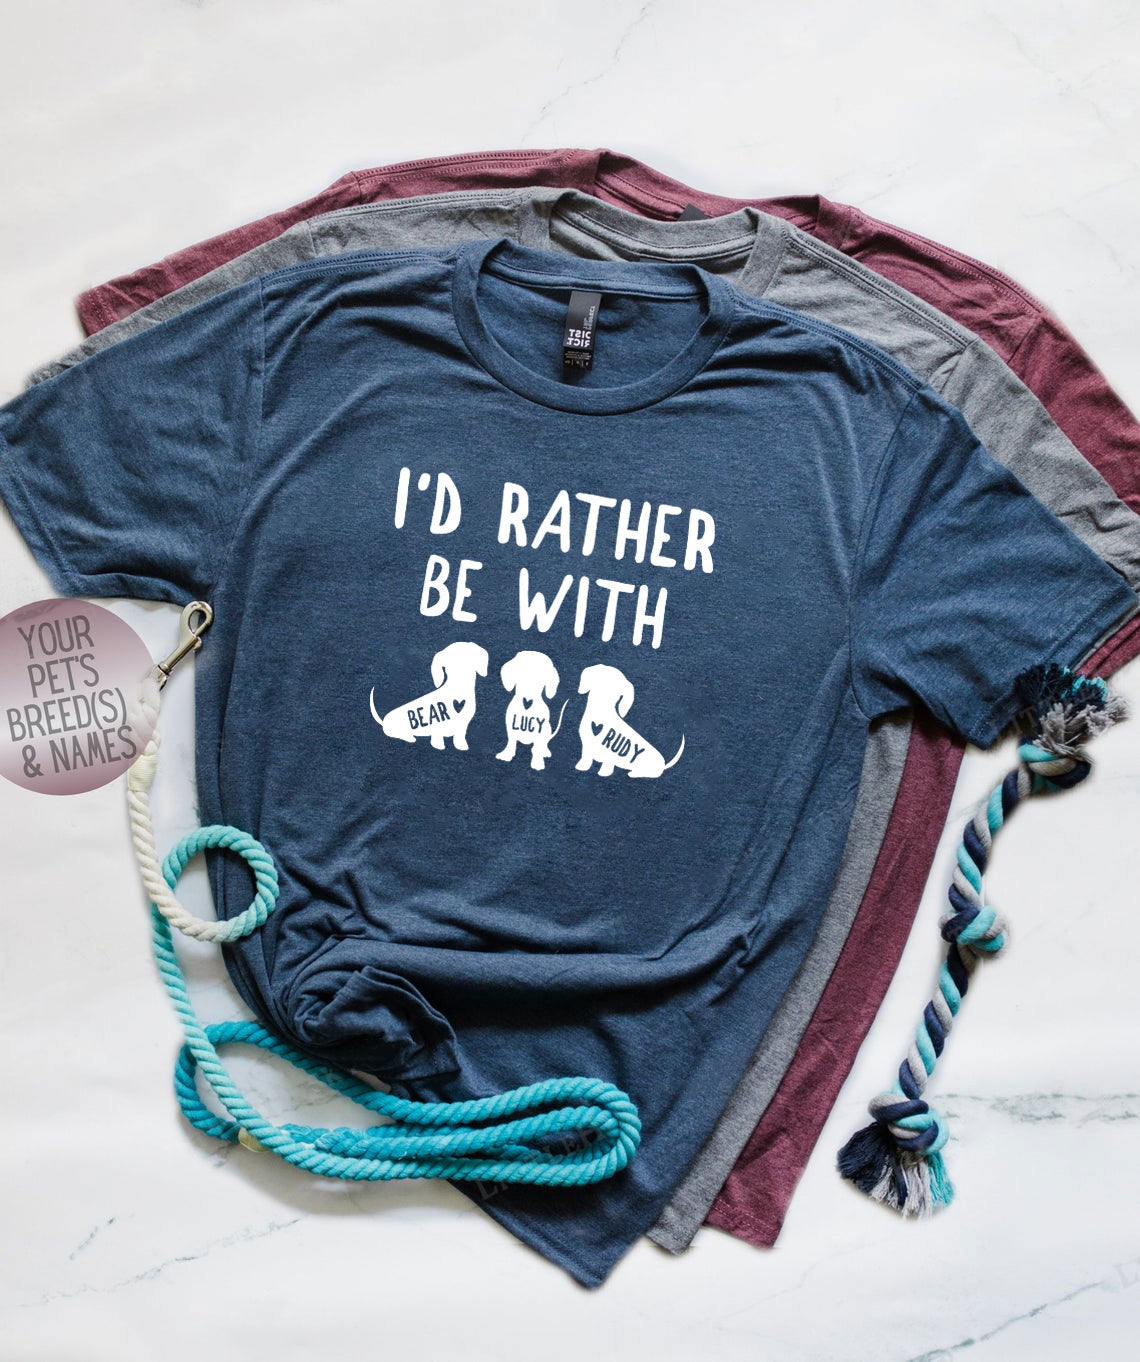 I’d Rather Be With Personalized Dachshund Shirts